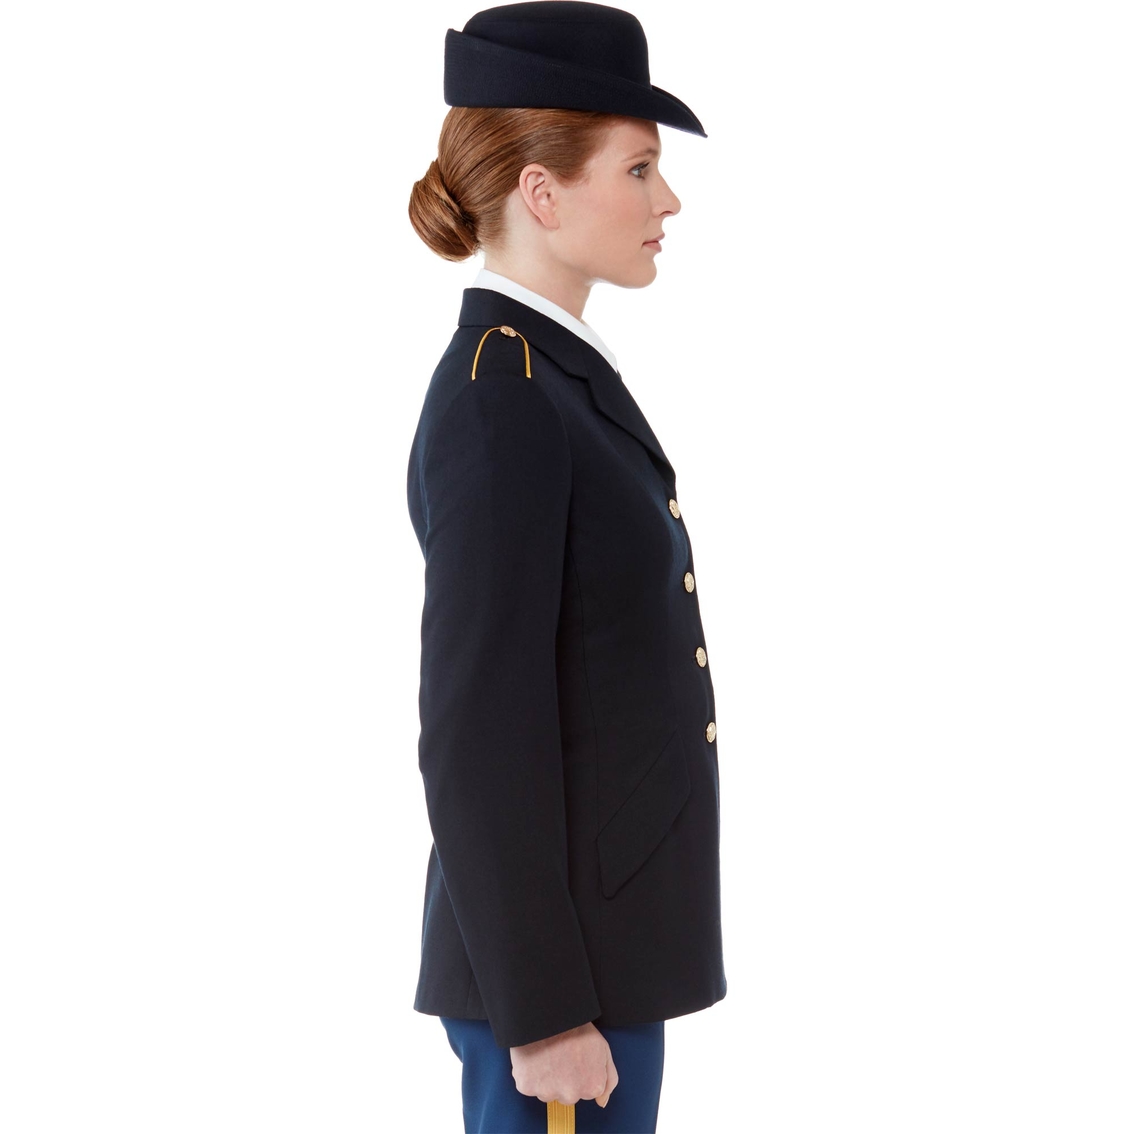 Army Women's Enlisted Blue Coat (ASU) - Image 3 of 4